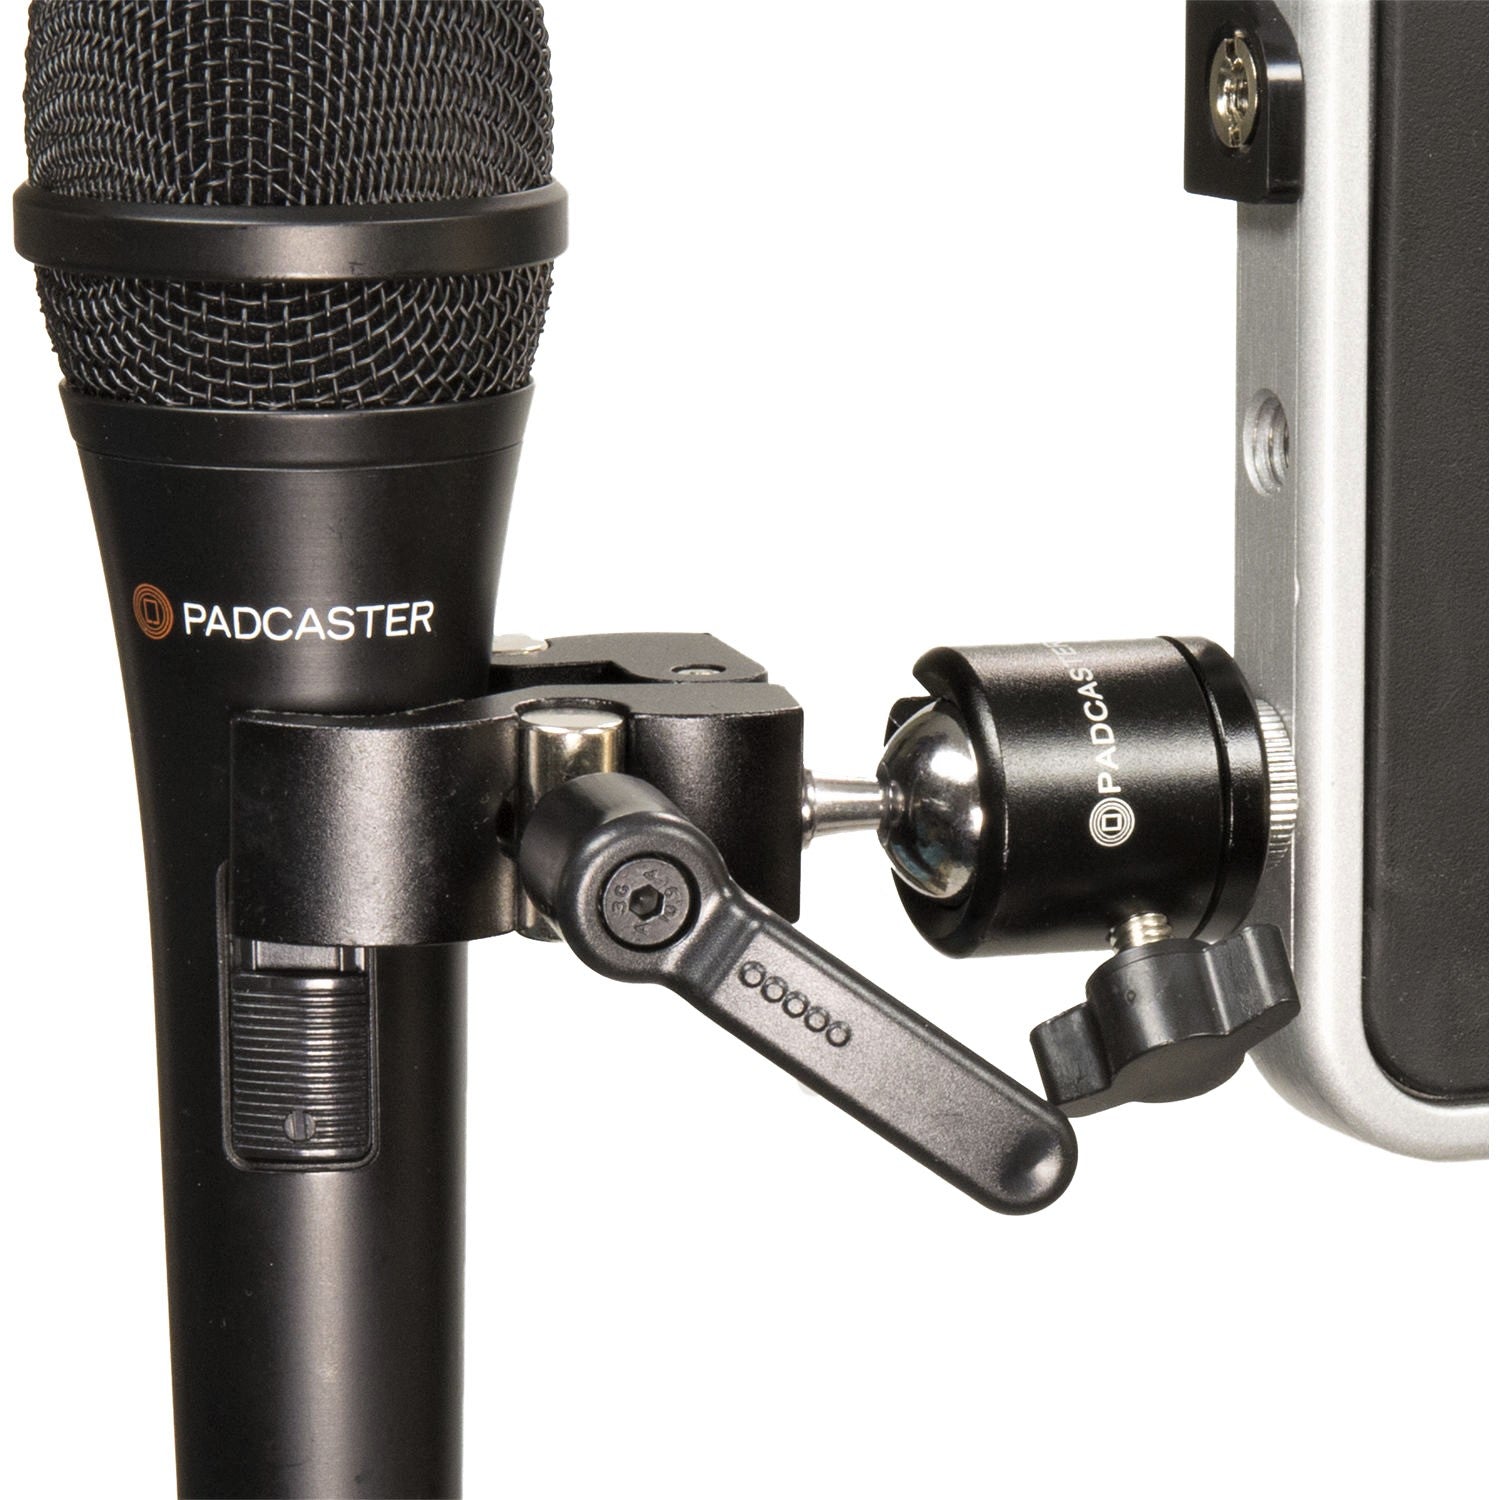 Padcaster Stick Microphone with Clamp System